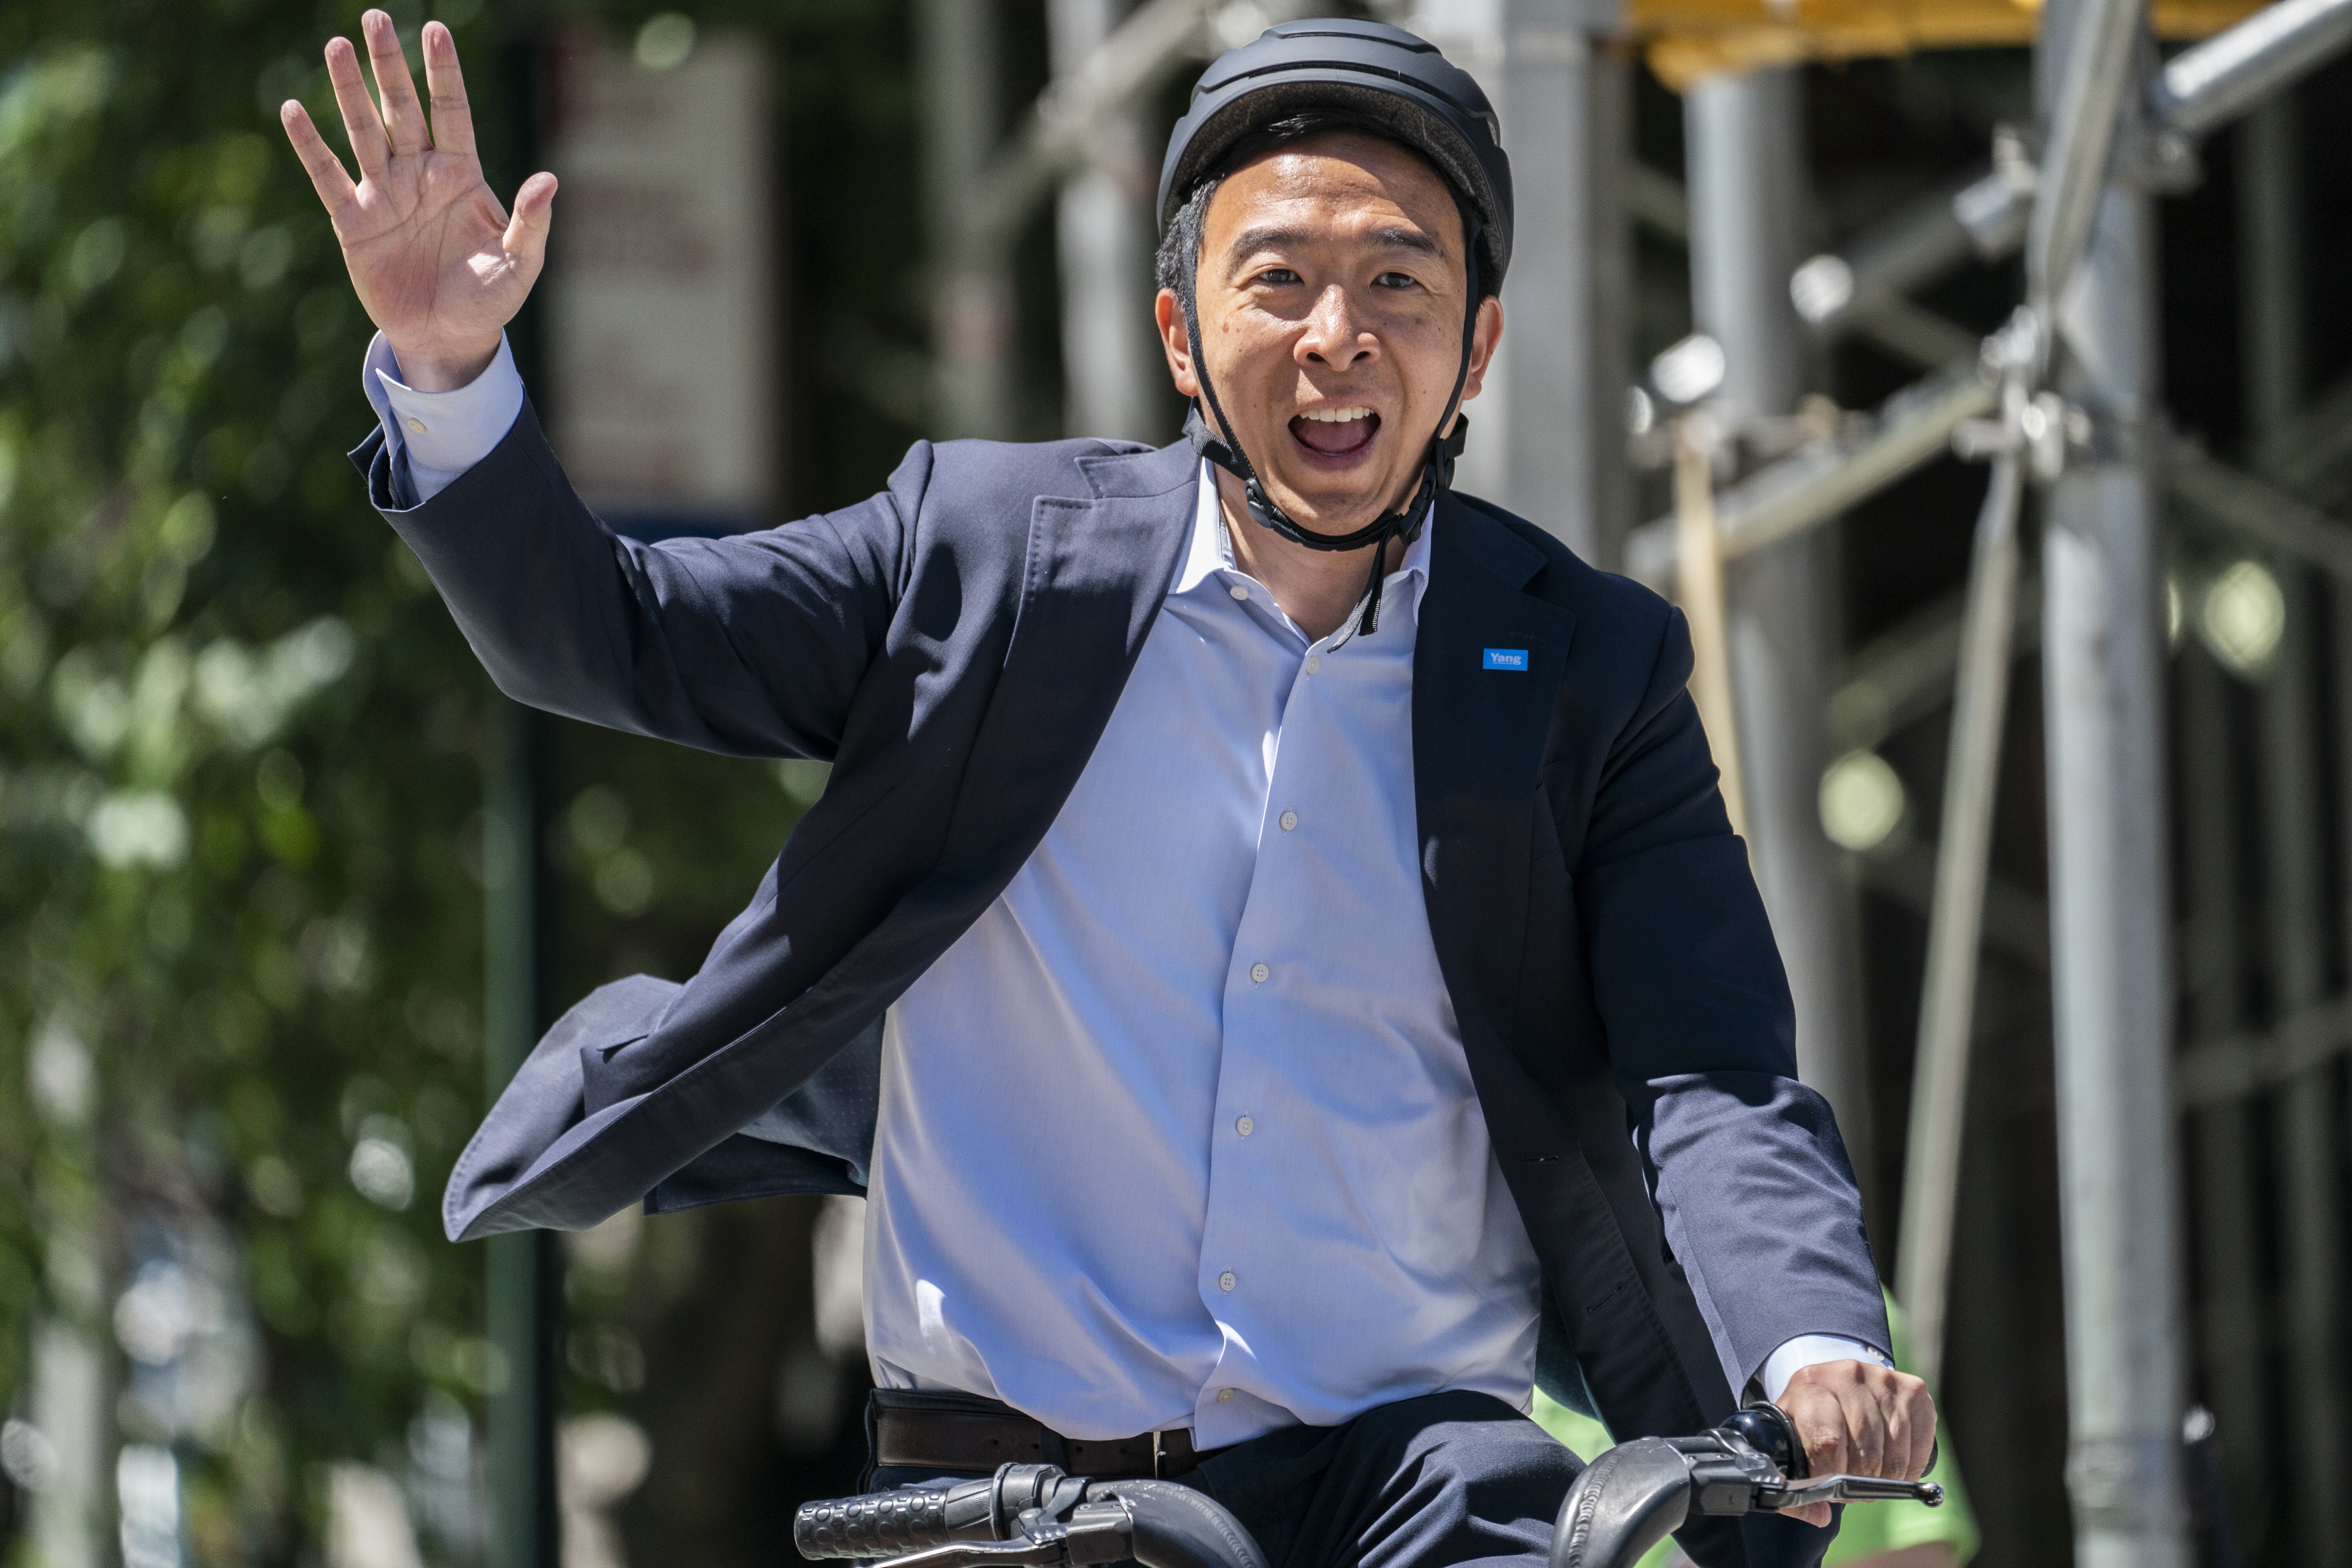 Andrew Yang, when he was a New York City mayoral candidate earlier this year. Photo: AP